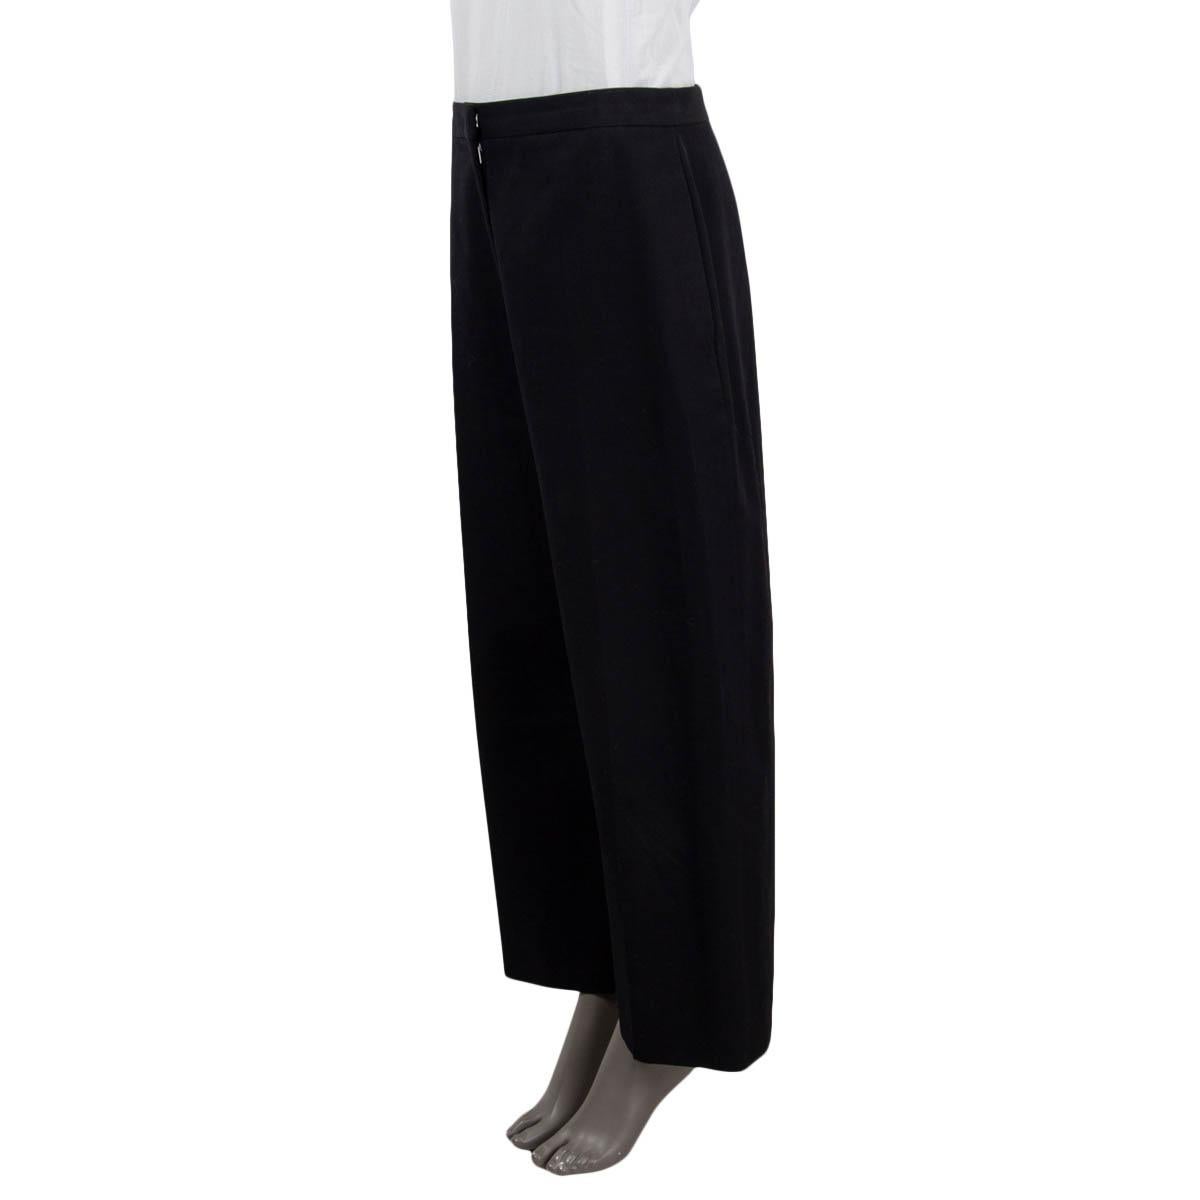 100% authentic Jil Sander wide leg pants in black cotton (100%), two pockets on the sides. Closes with a concealed zipper on the front and one hook. Lined in black cotton (100%). Have been worn and are in excellent condition.

Measurements
Tag